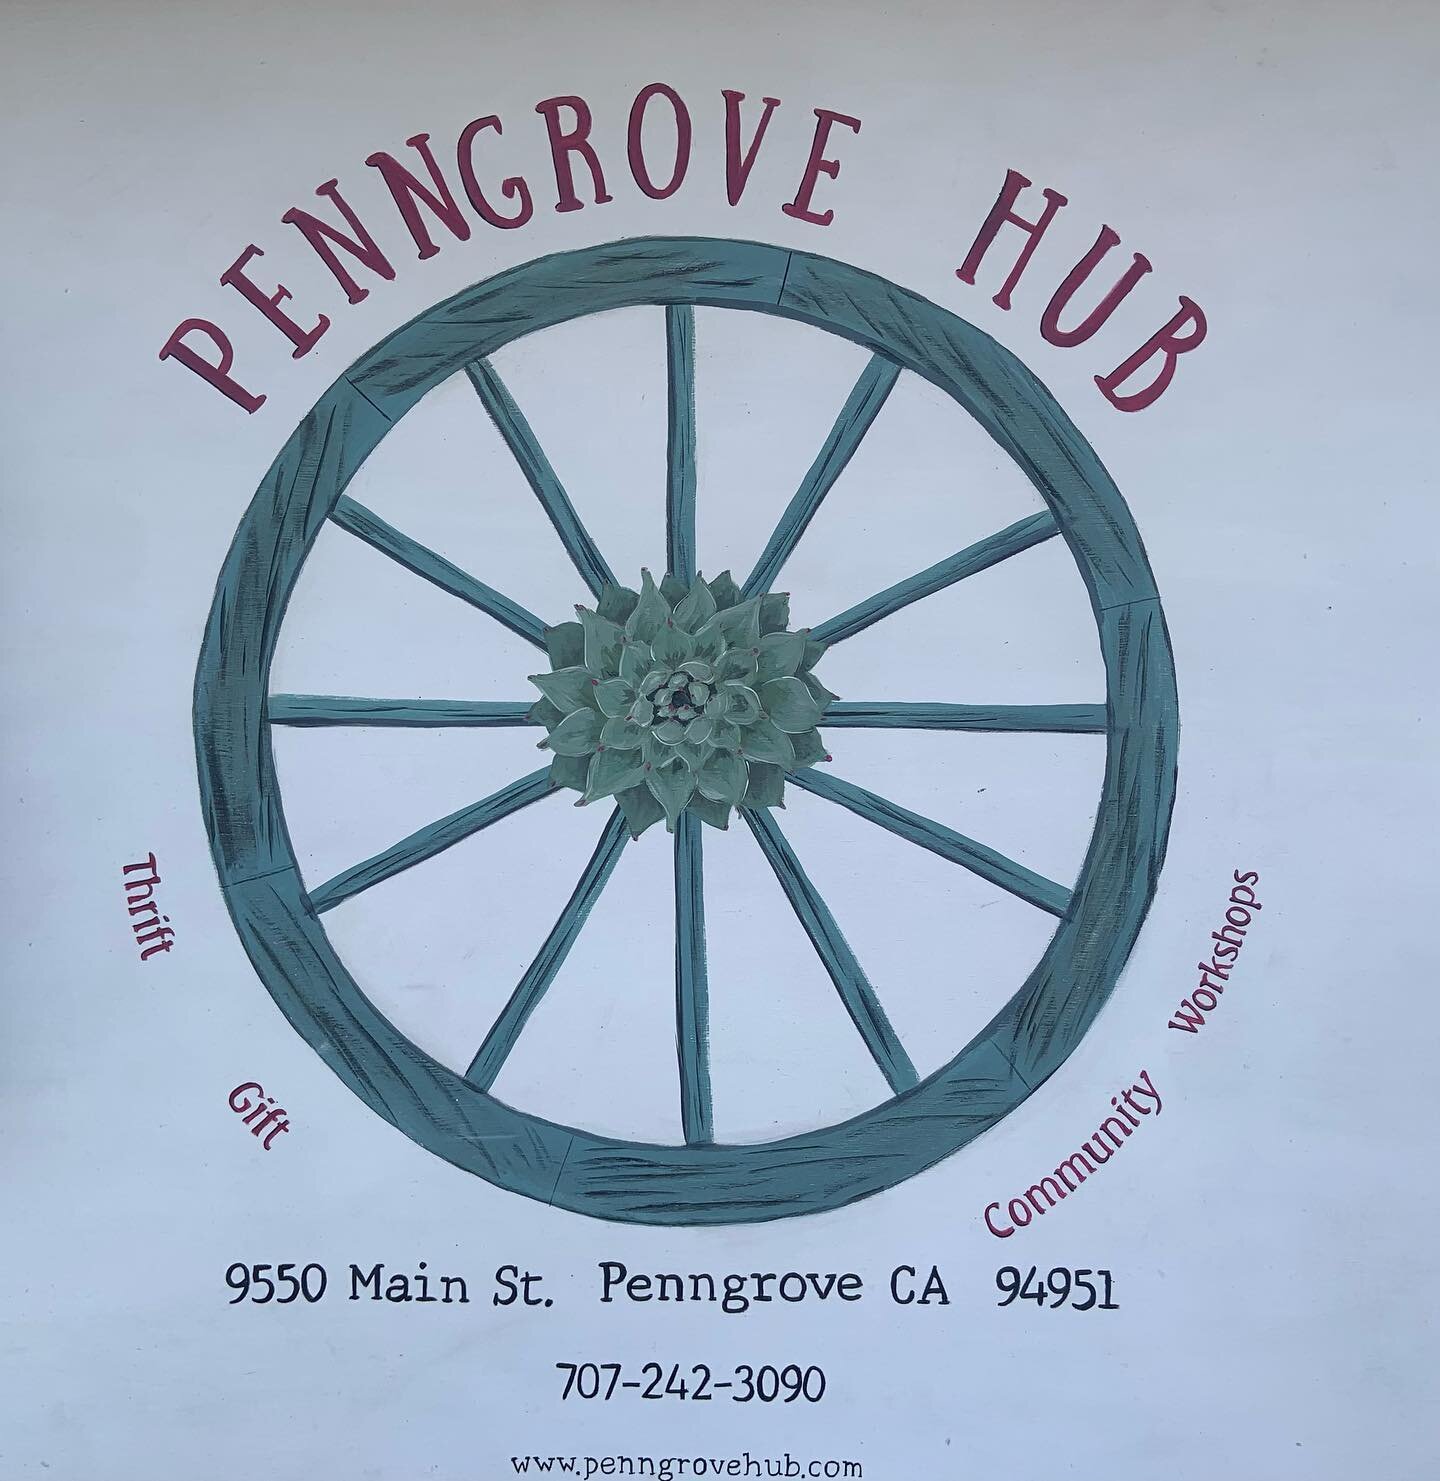 Penngrove Hub, is more than a thrift store. It is a must stop destination that somehow is far bigger than it looks. Within their walls you will find locally made ornaments, holiday decor and an eclectic mix of surprising treasures. Get lost in the se